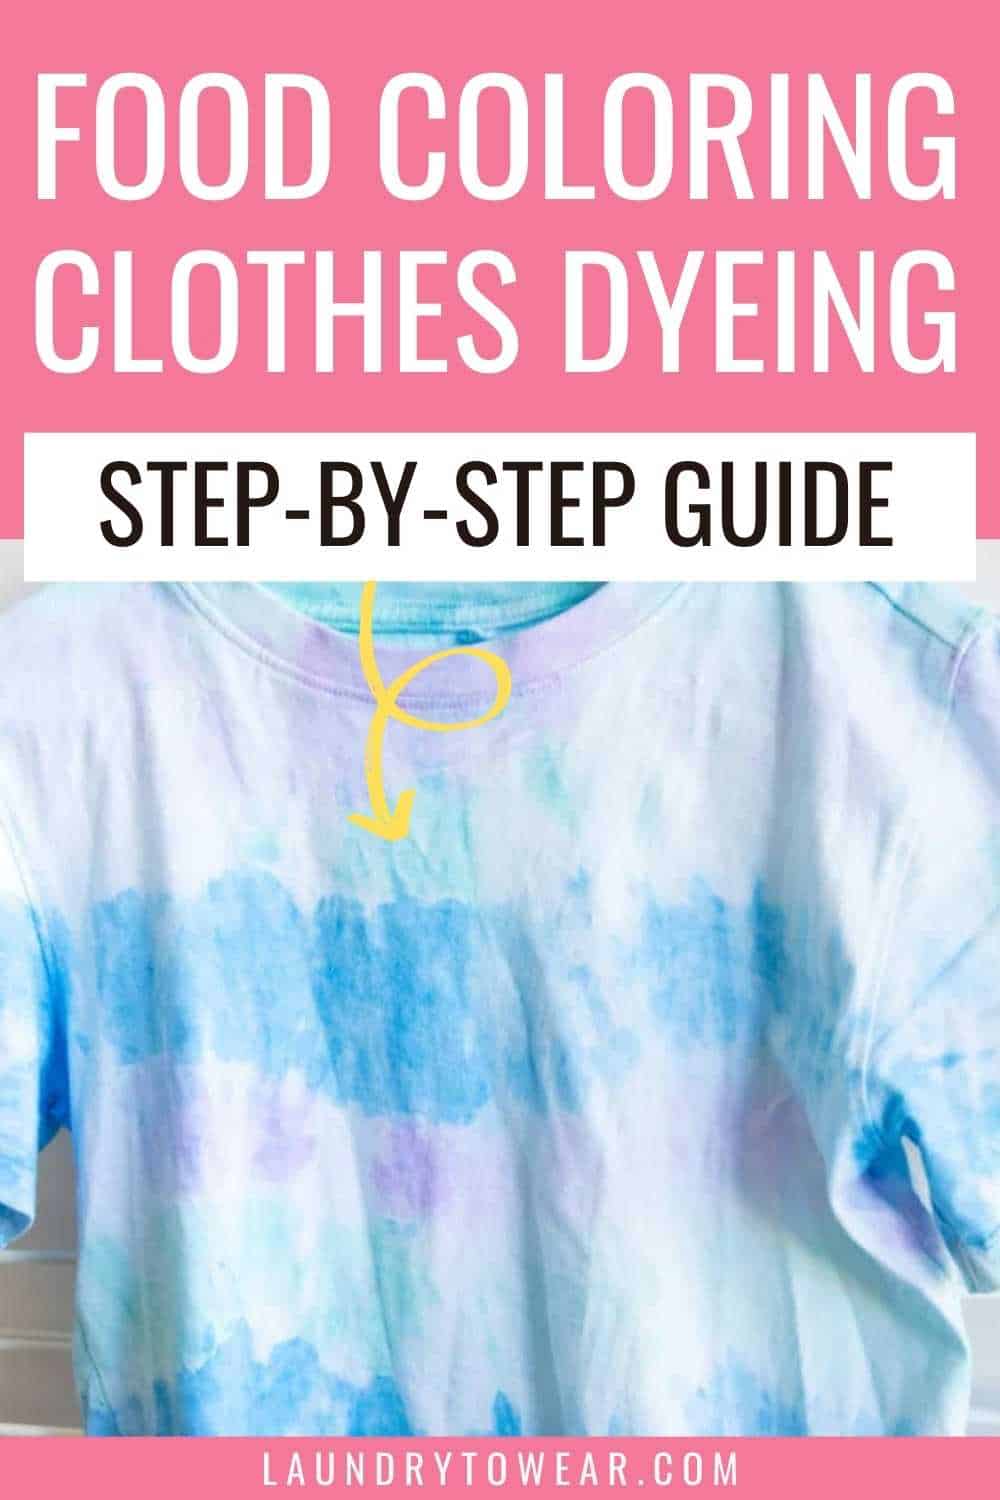 How to Dye Clothing With Food Colouring